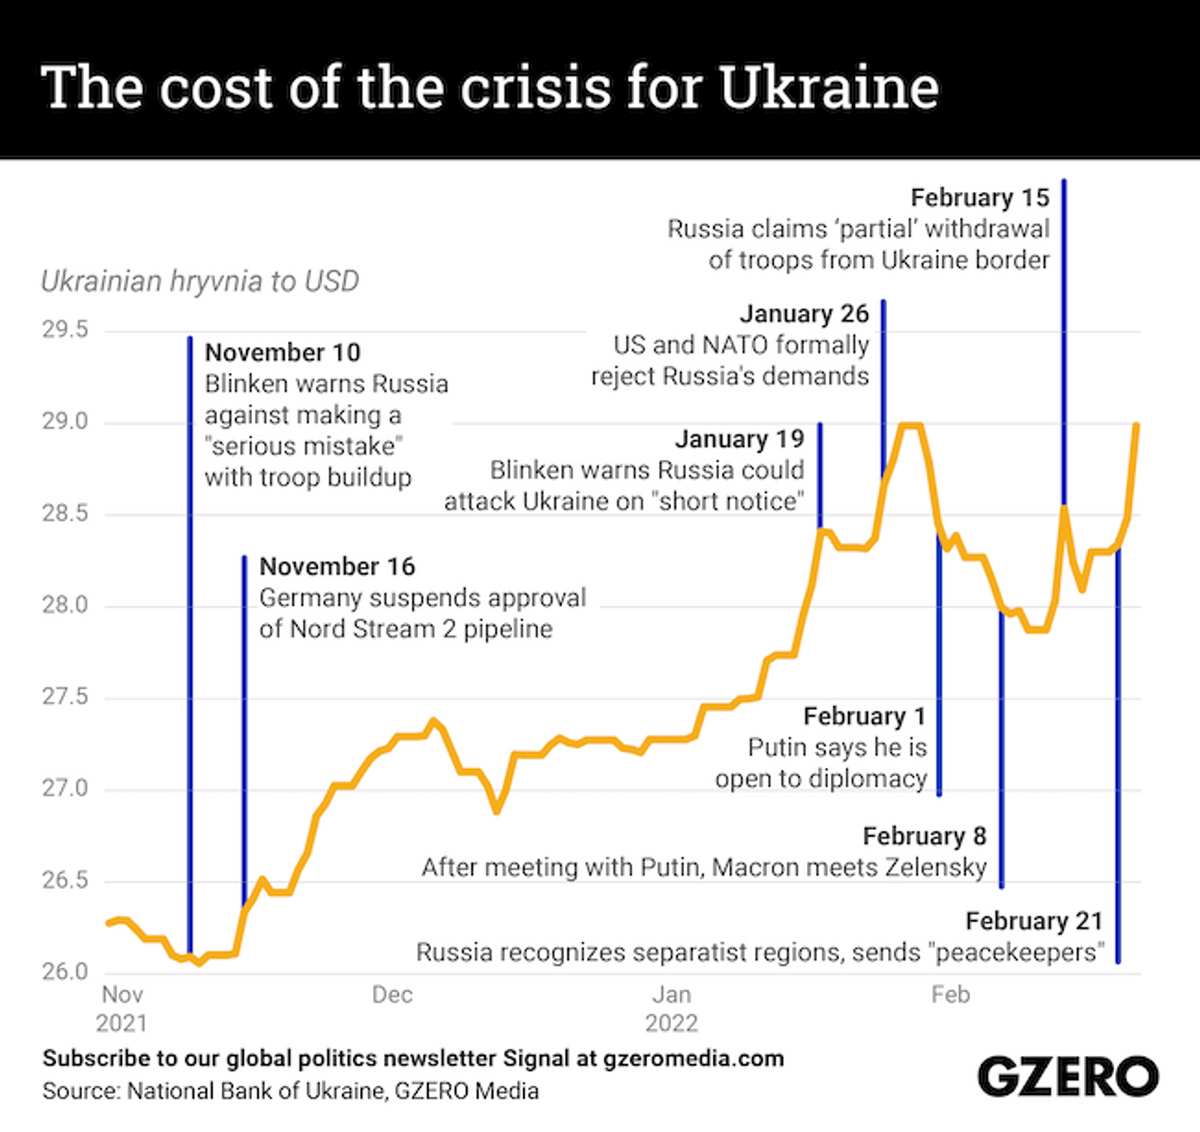 The Graphic Truth: The cost of the crisis for Ukraine